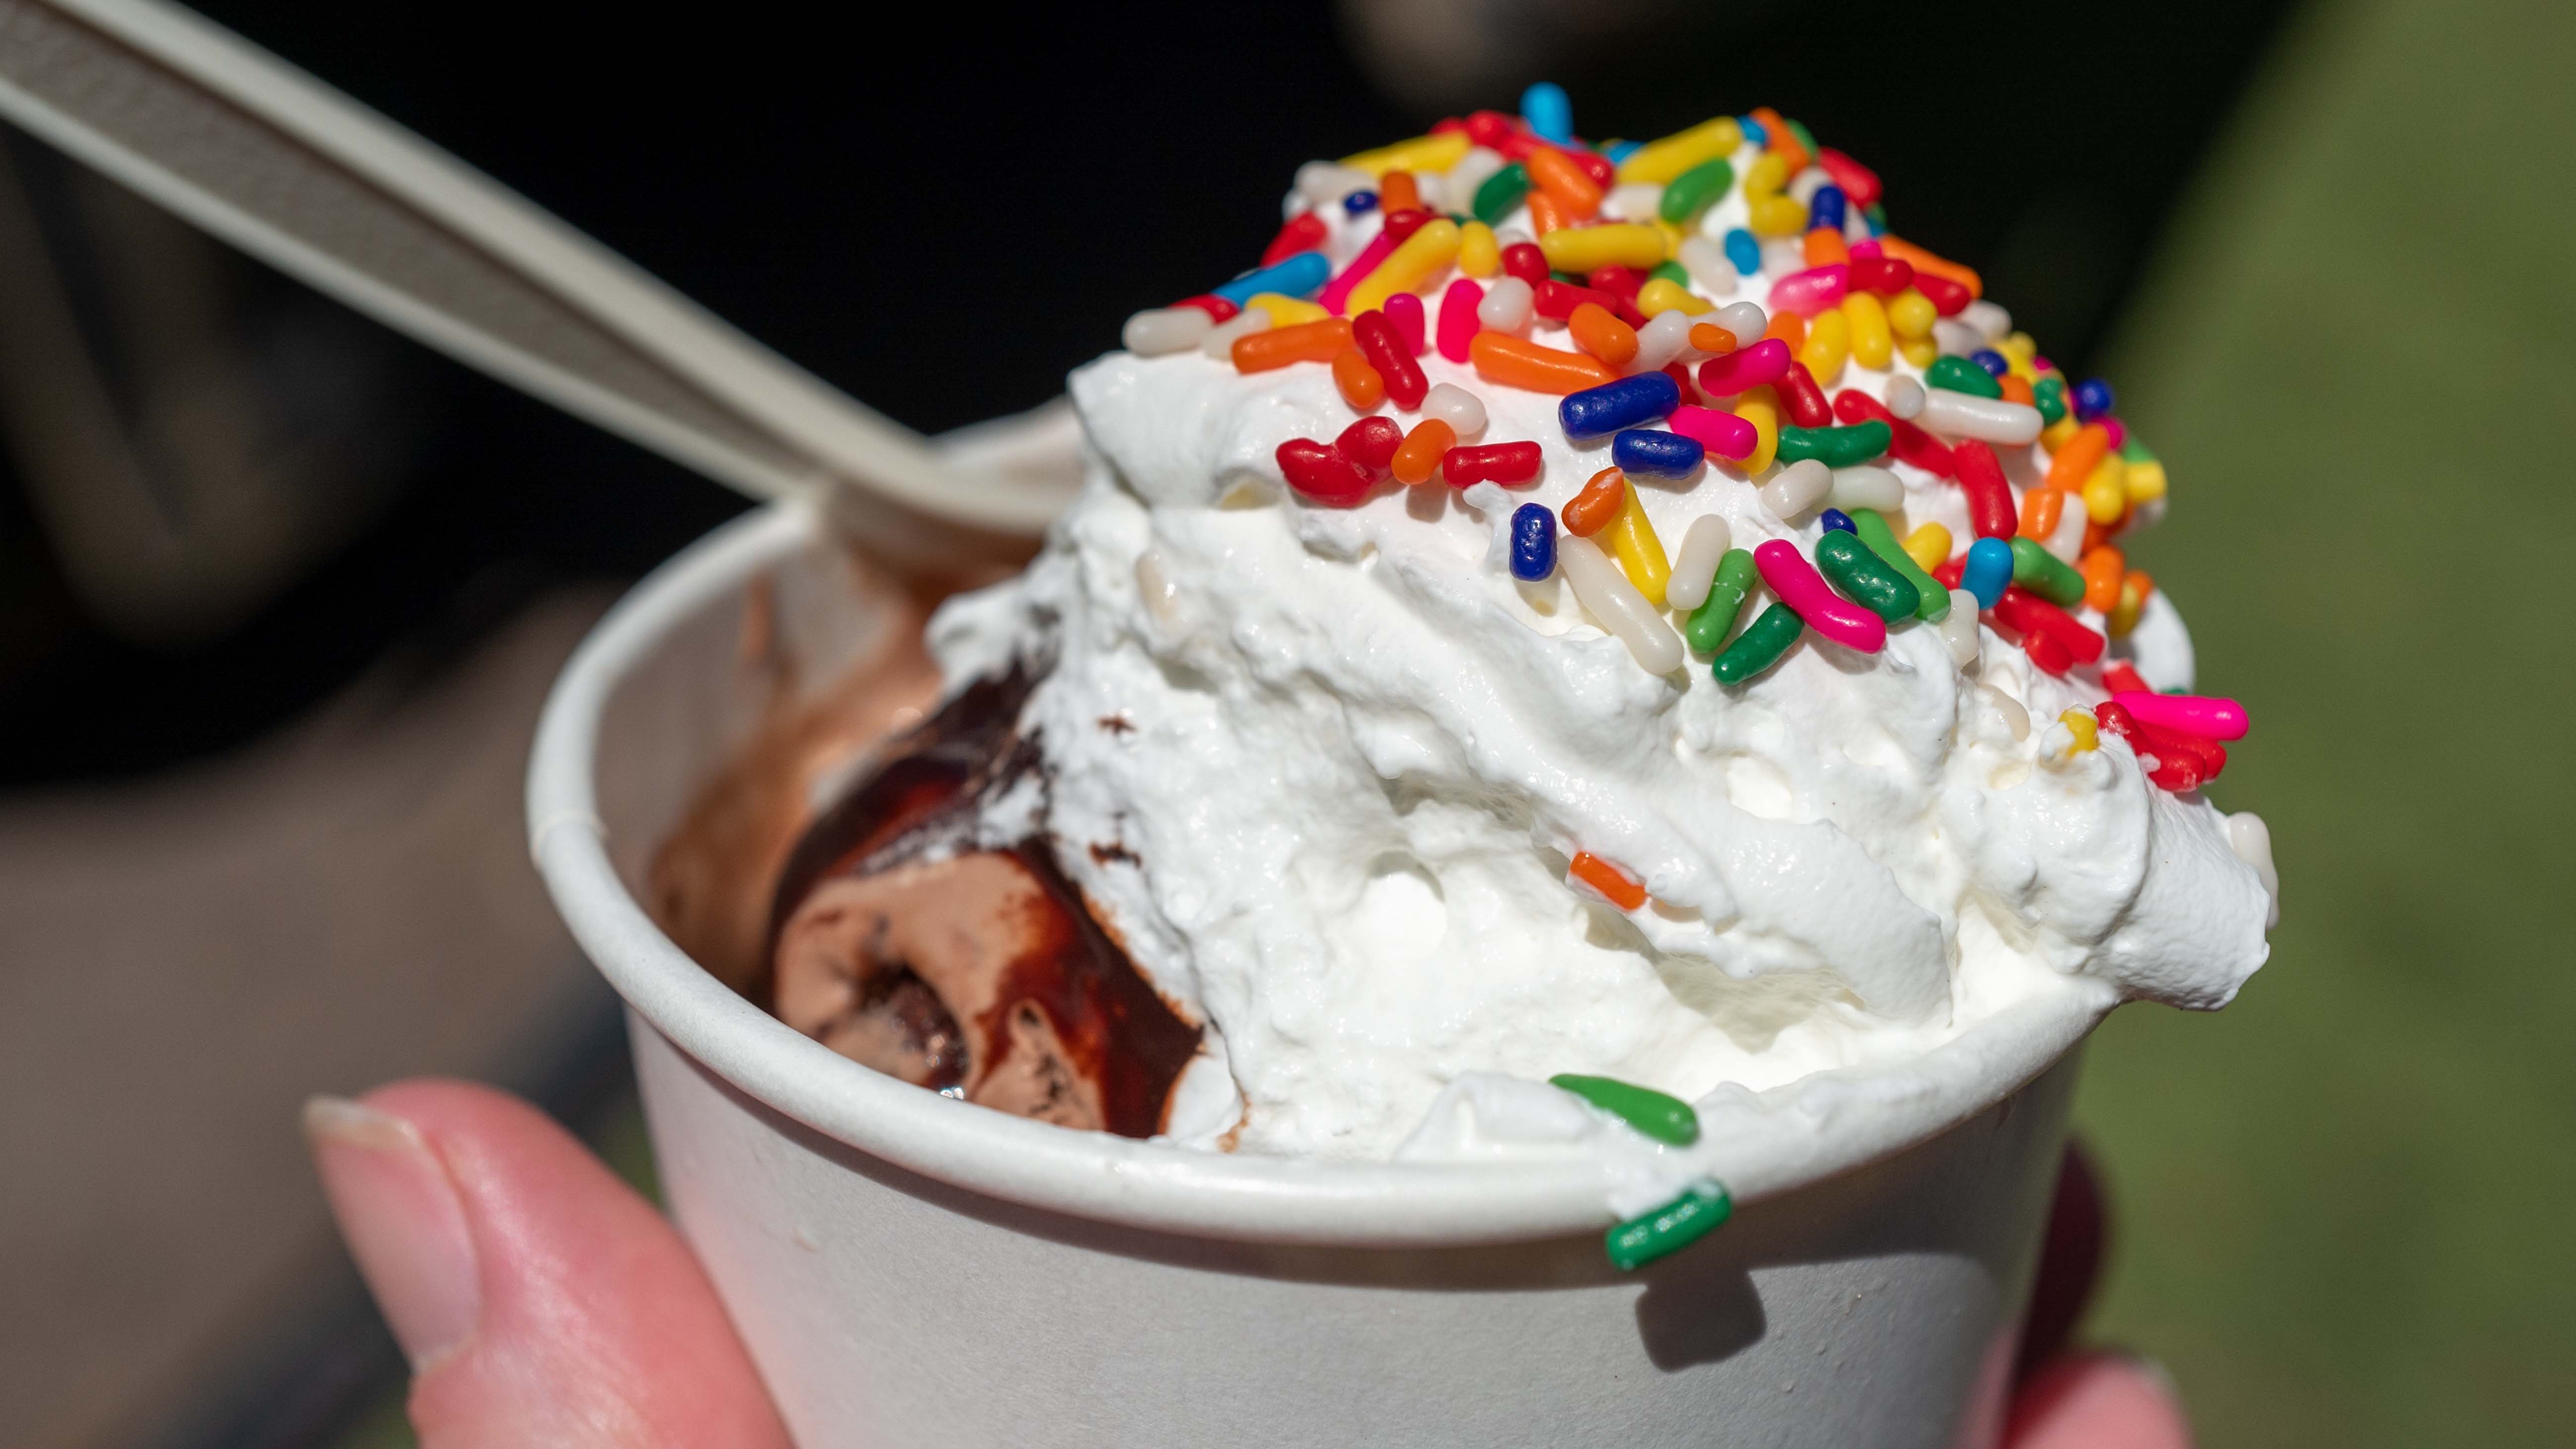 Garlic? Curry? Cold sweat?! Strange ice cream flavors are sweeping the nation this summer